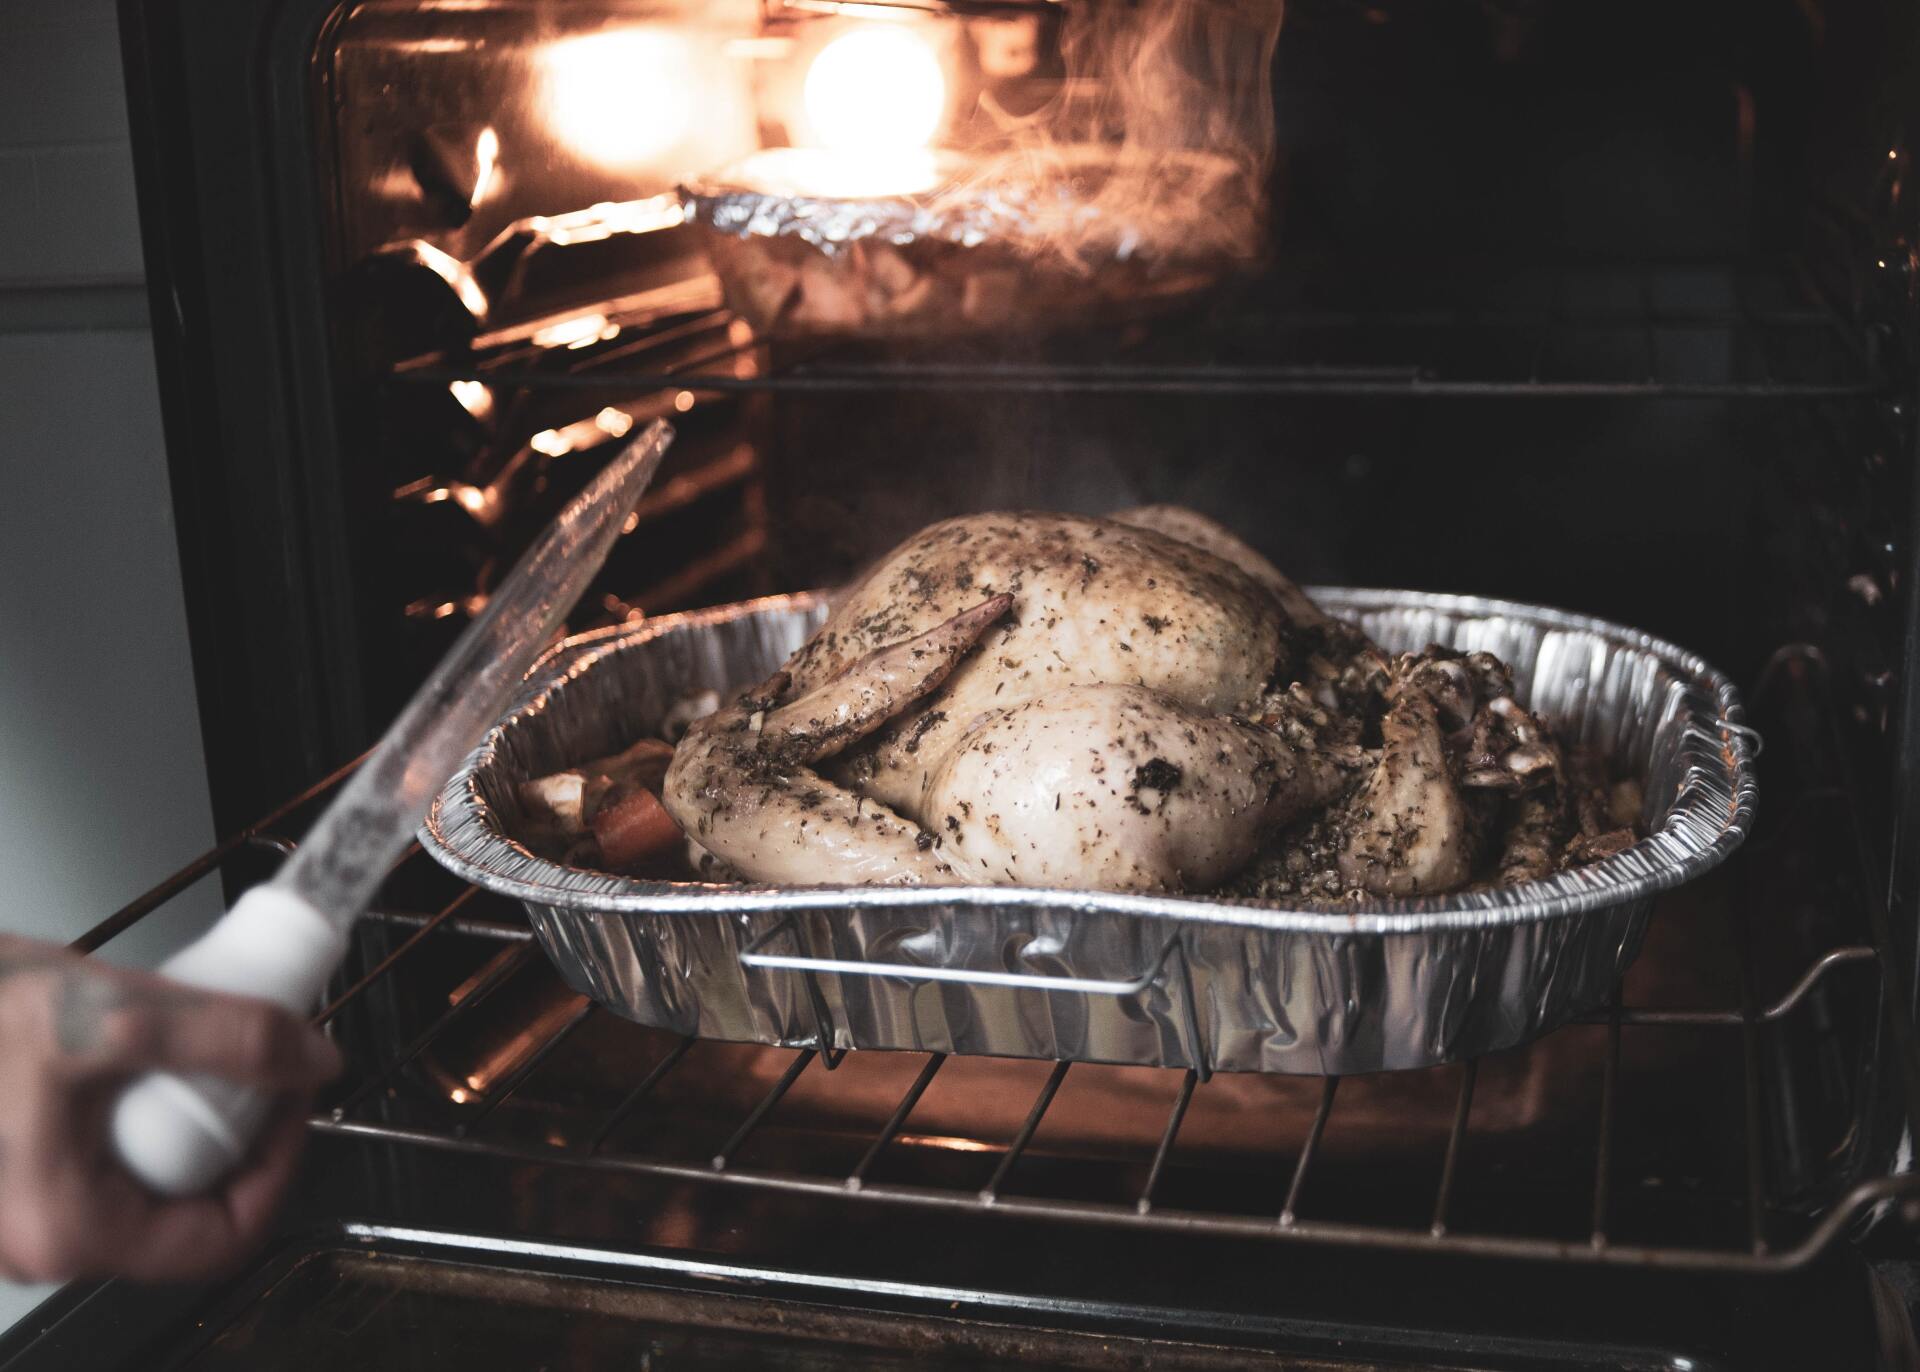 An open oven with a tray of raw chicken placed inside, ready for cooking.